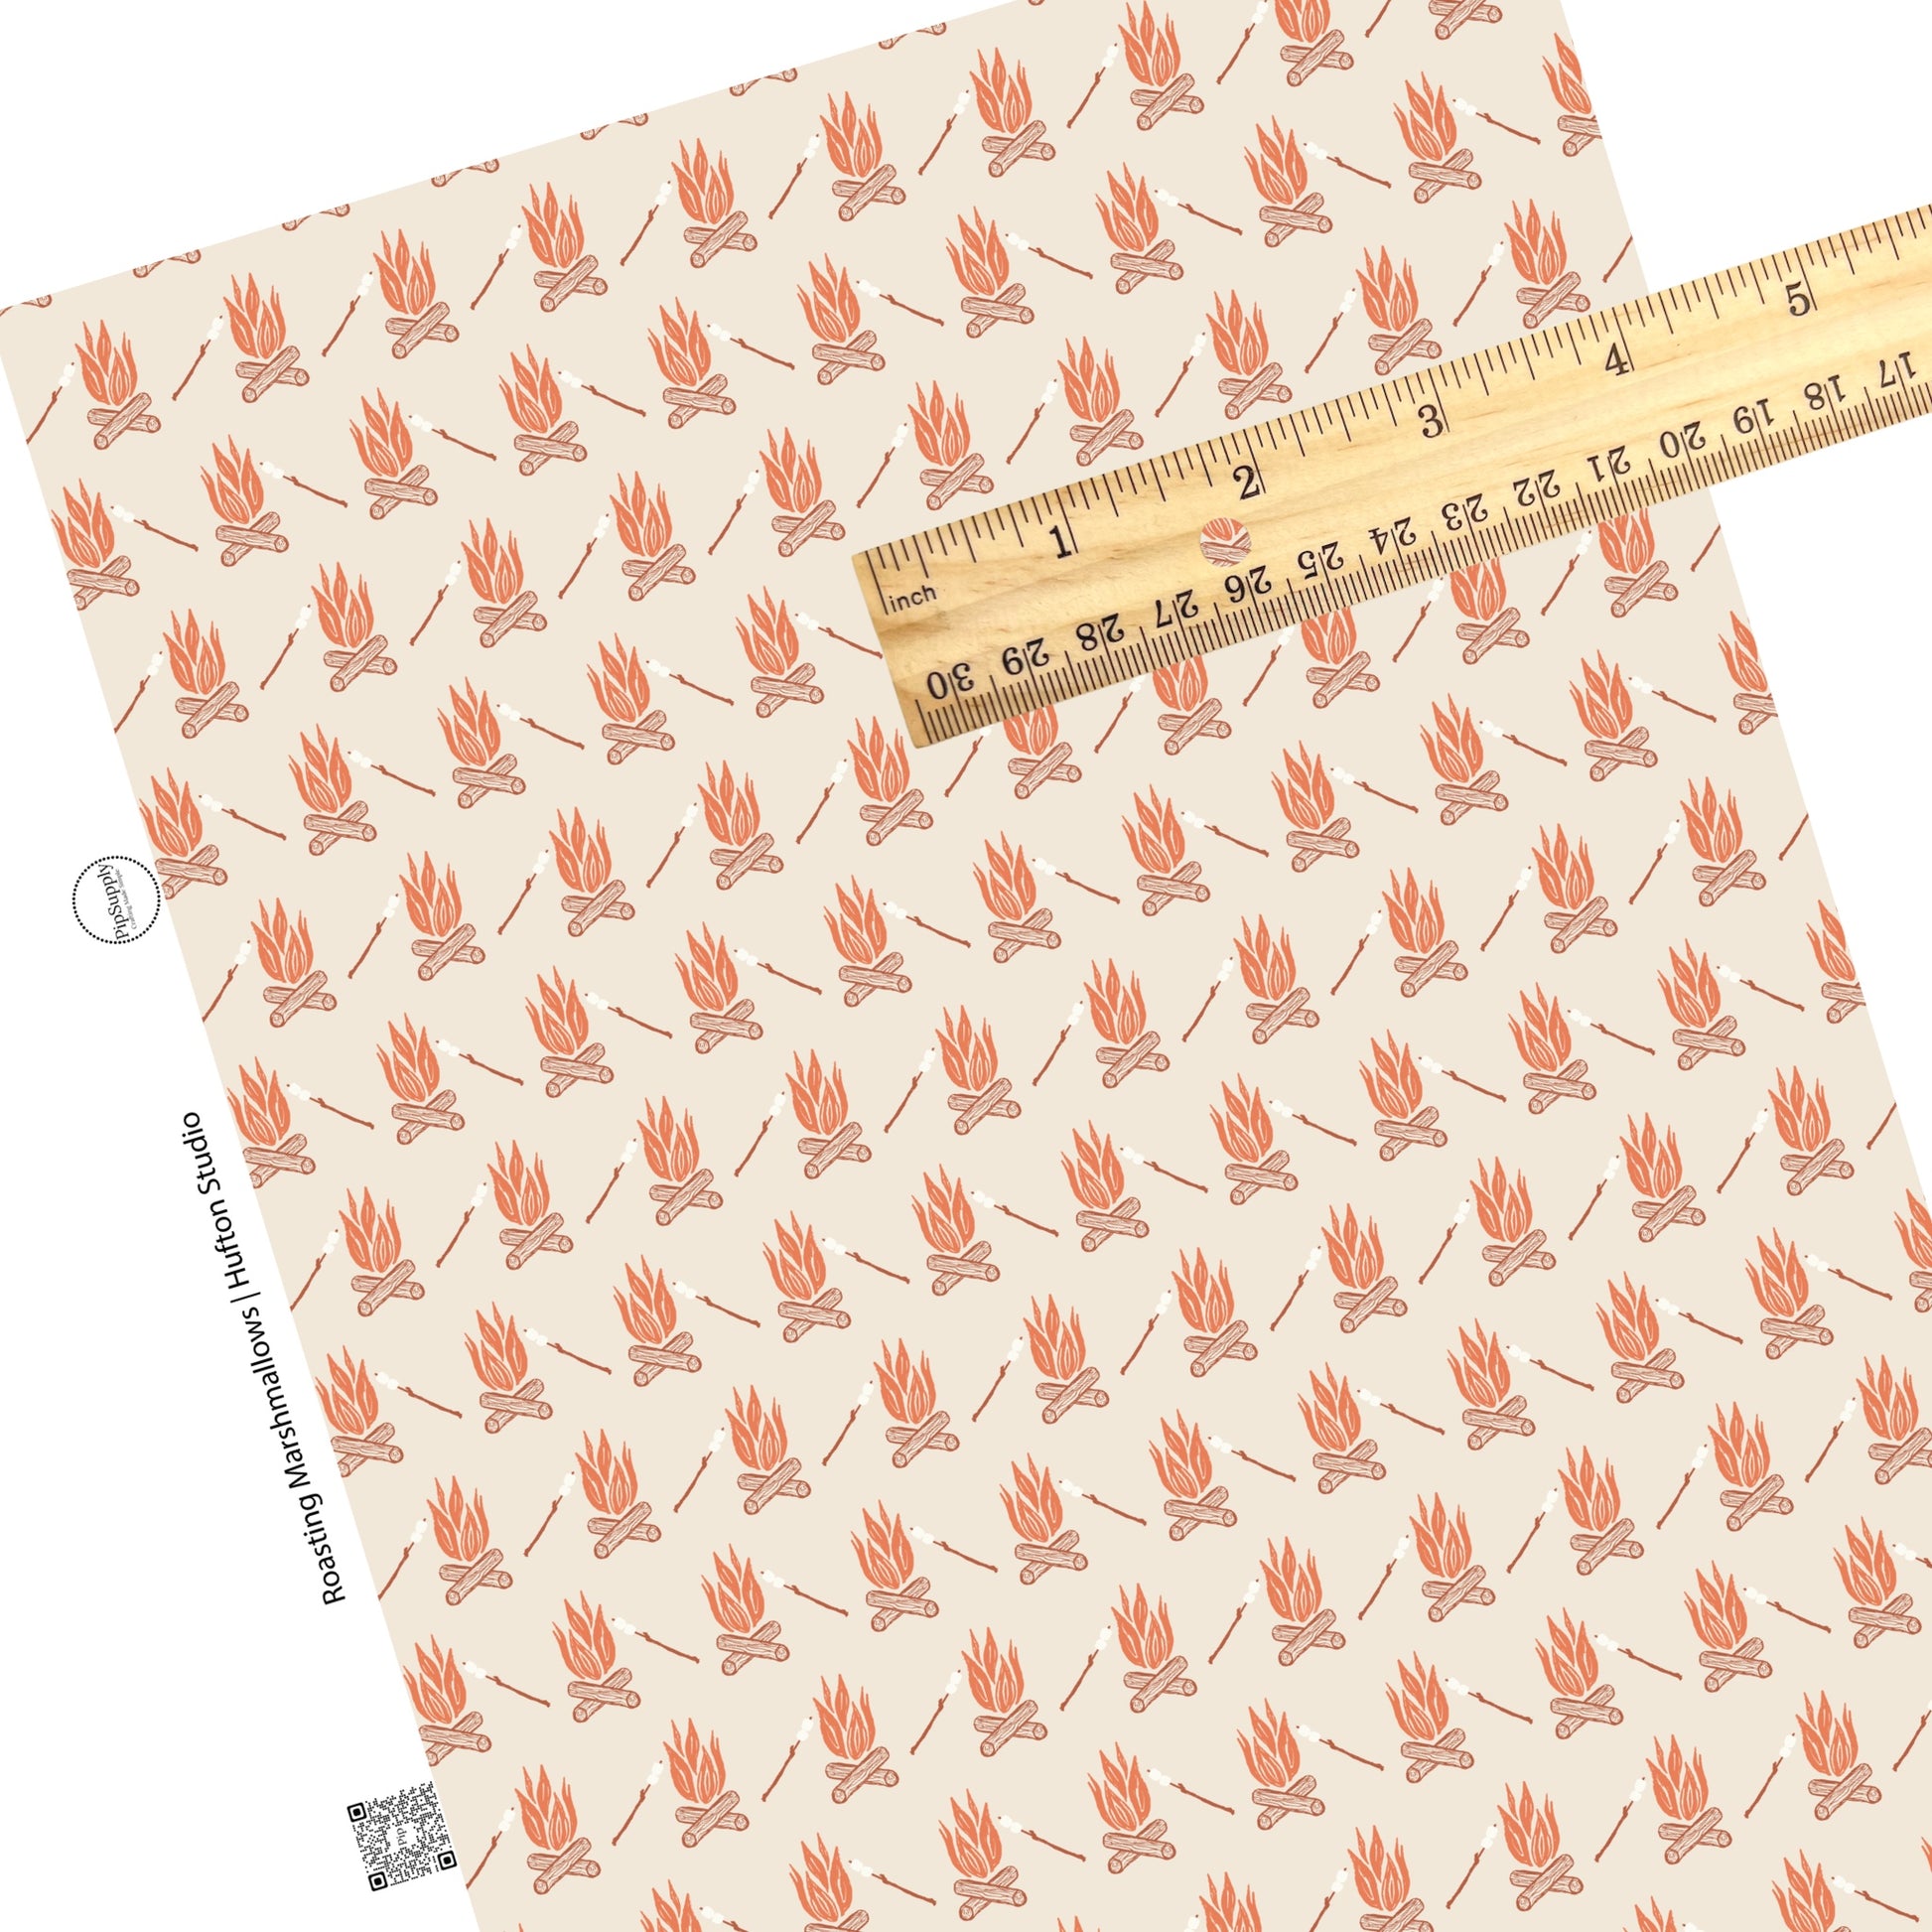 These fall themed faux leather sheets contain the following design elements: roasting marshmallows over the camp fire on cream. Our CPSIA compliant faux leather sheets or rolls can be used for all types of crafting projects.